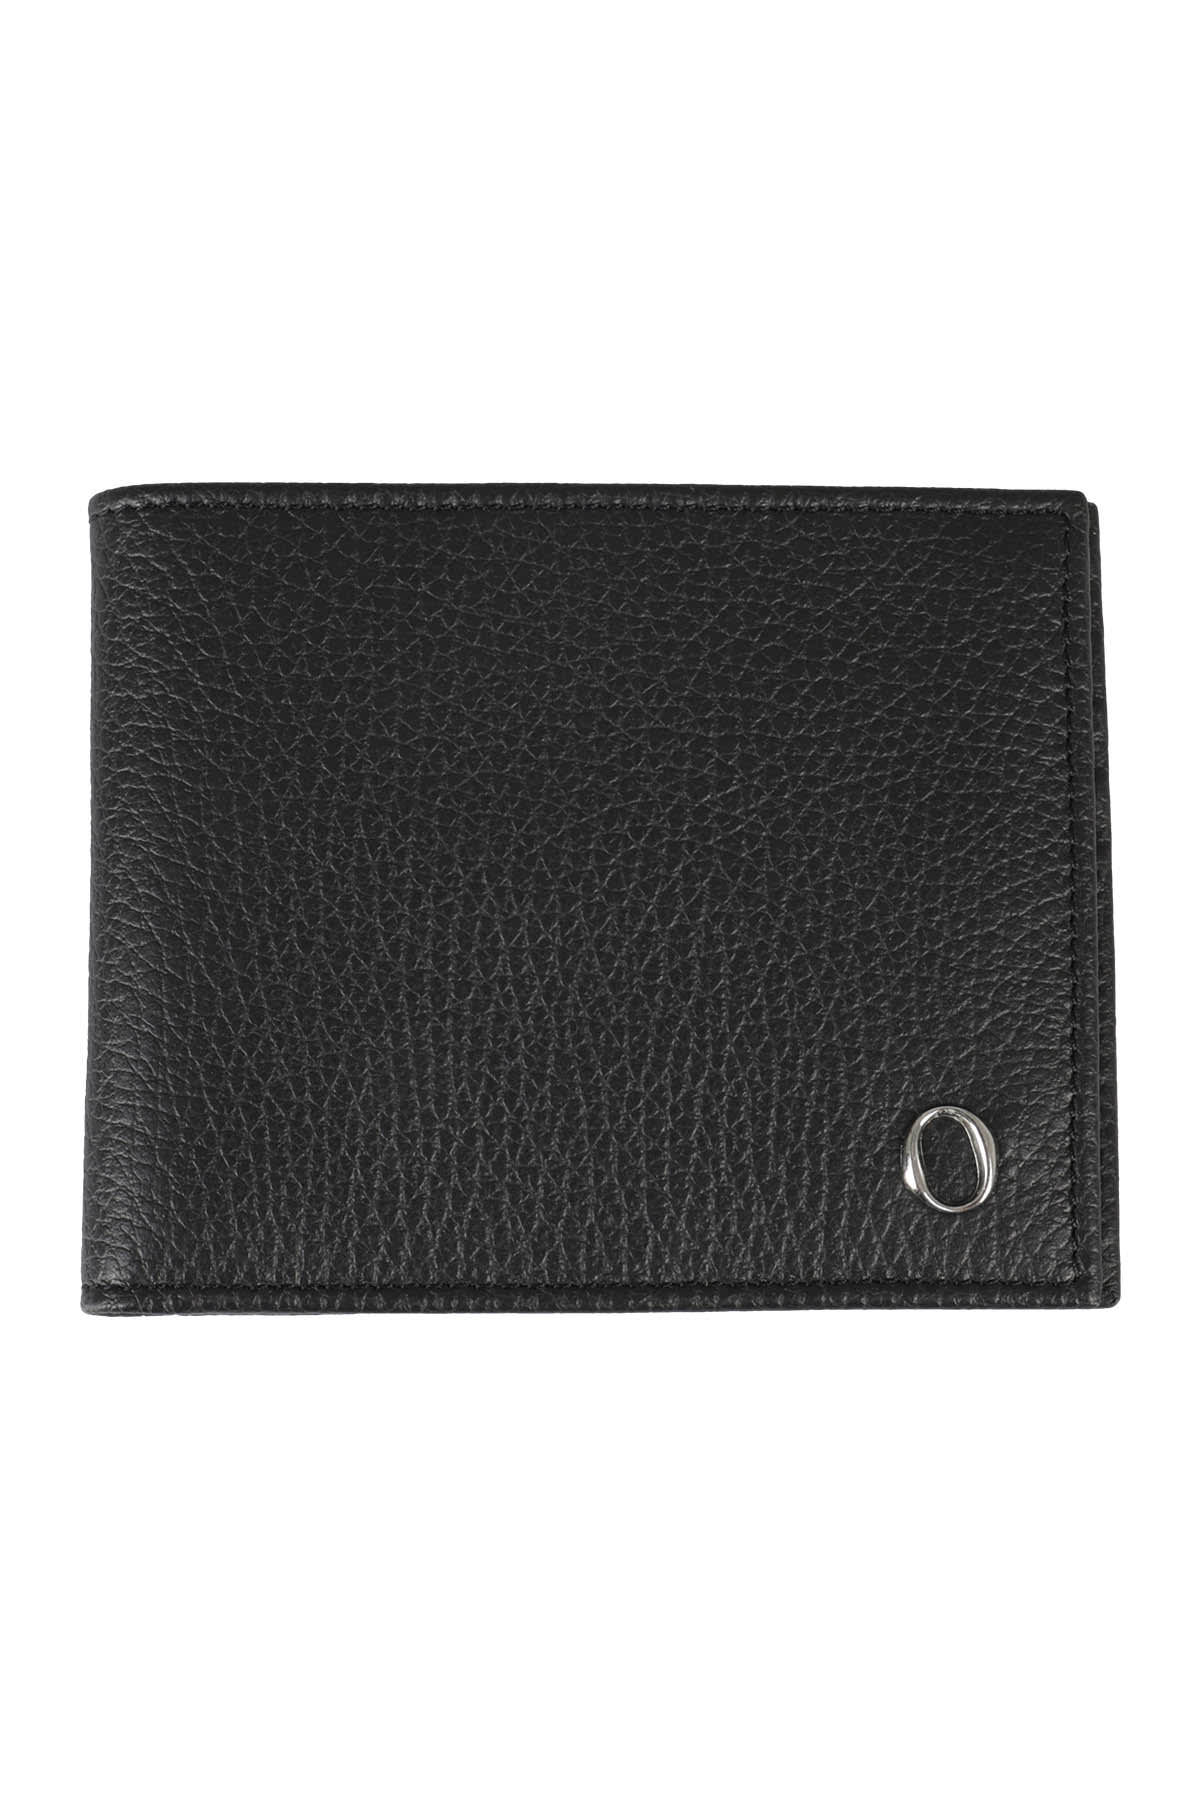 Orciani Leather Wallet In Ner Nero